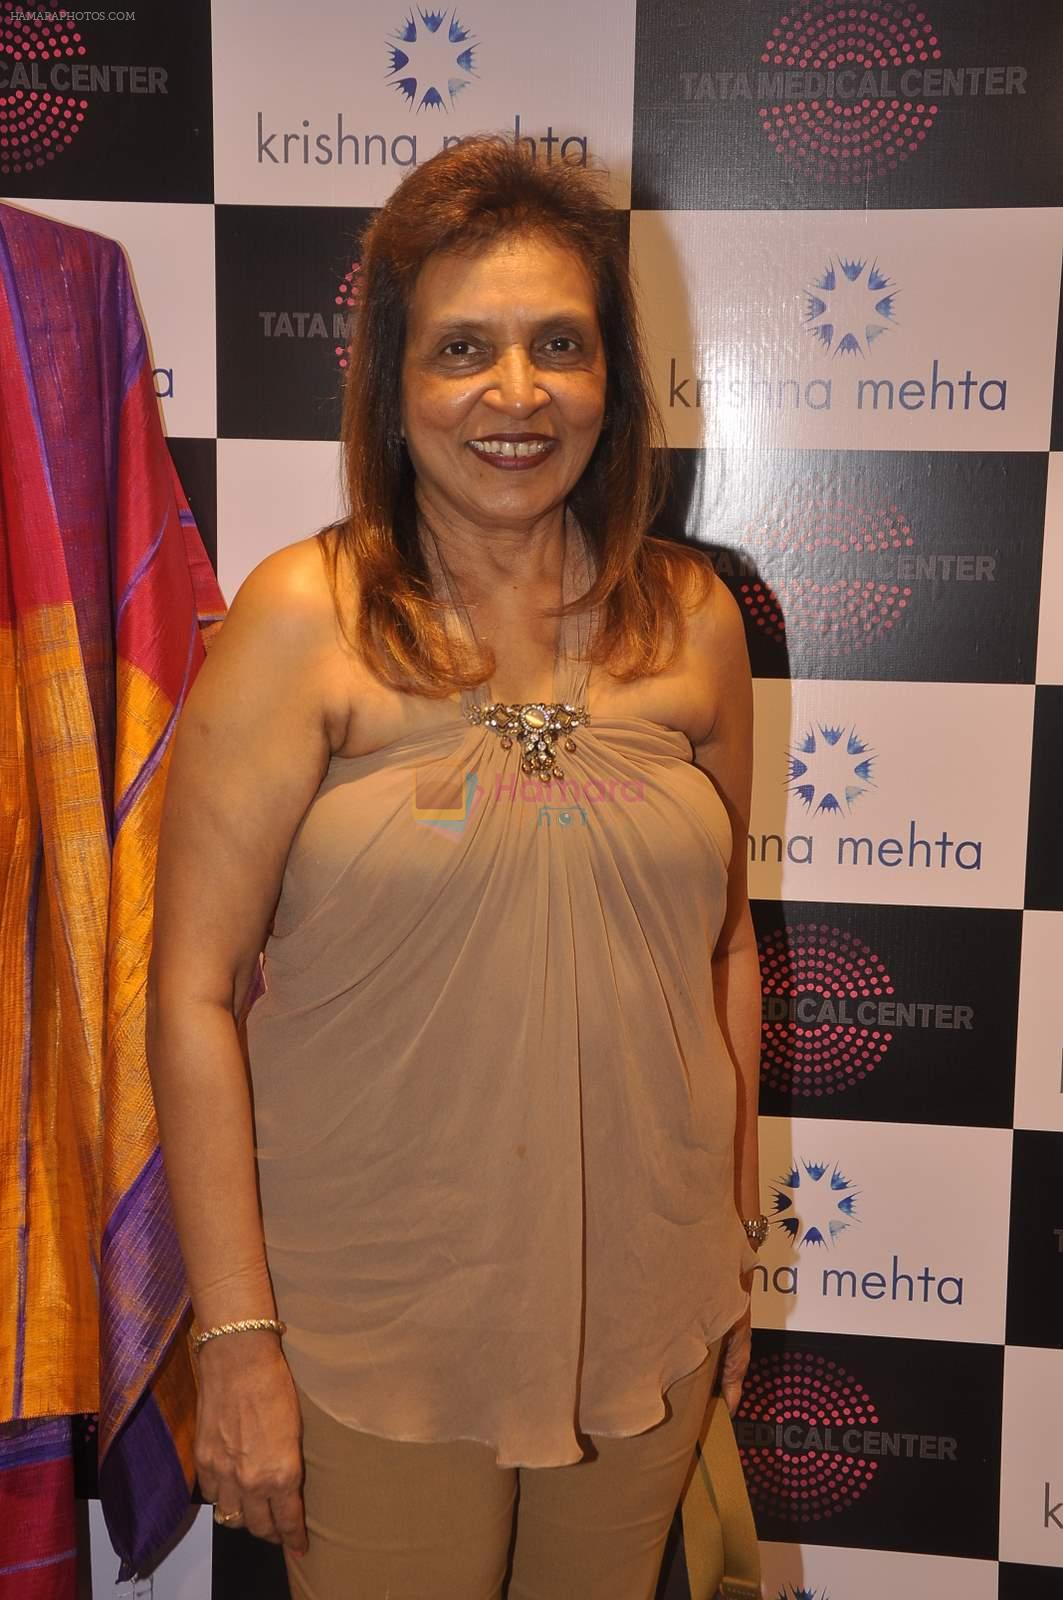 at Krishna Mehta's store in association with Tata Medical Center in Chowpatty on 10th July 2015